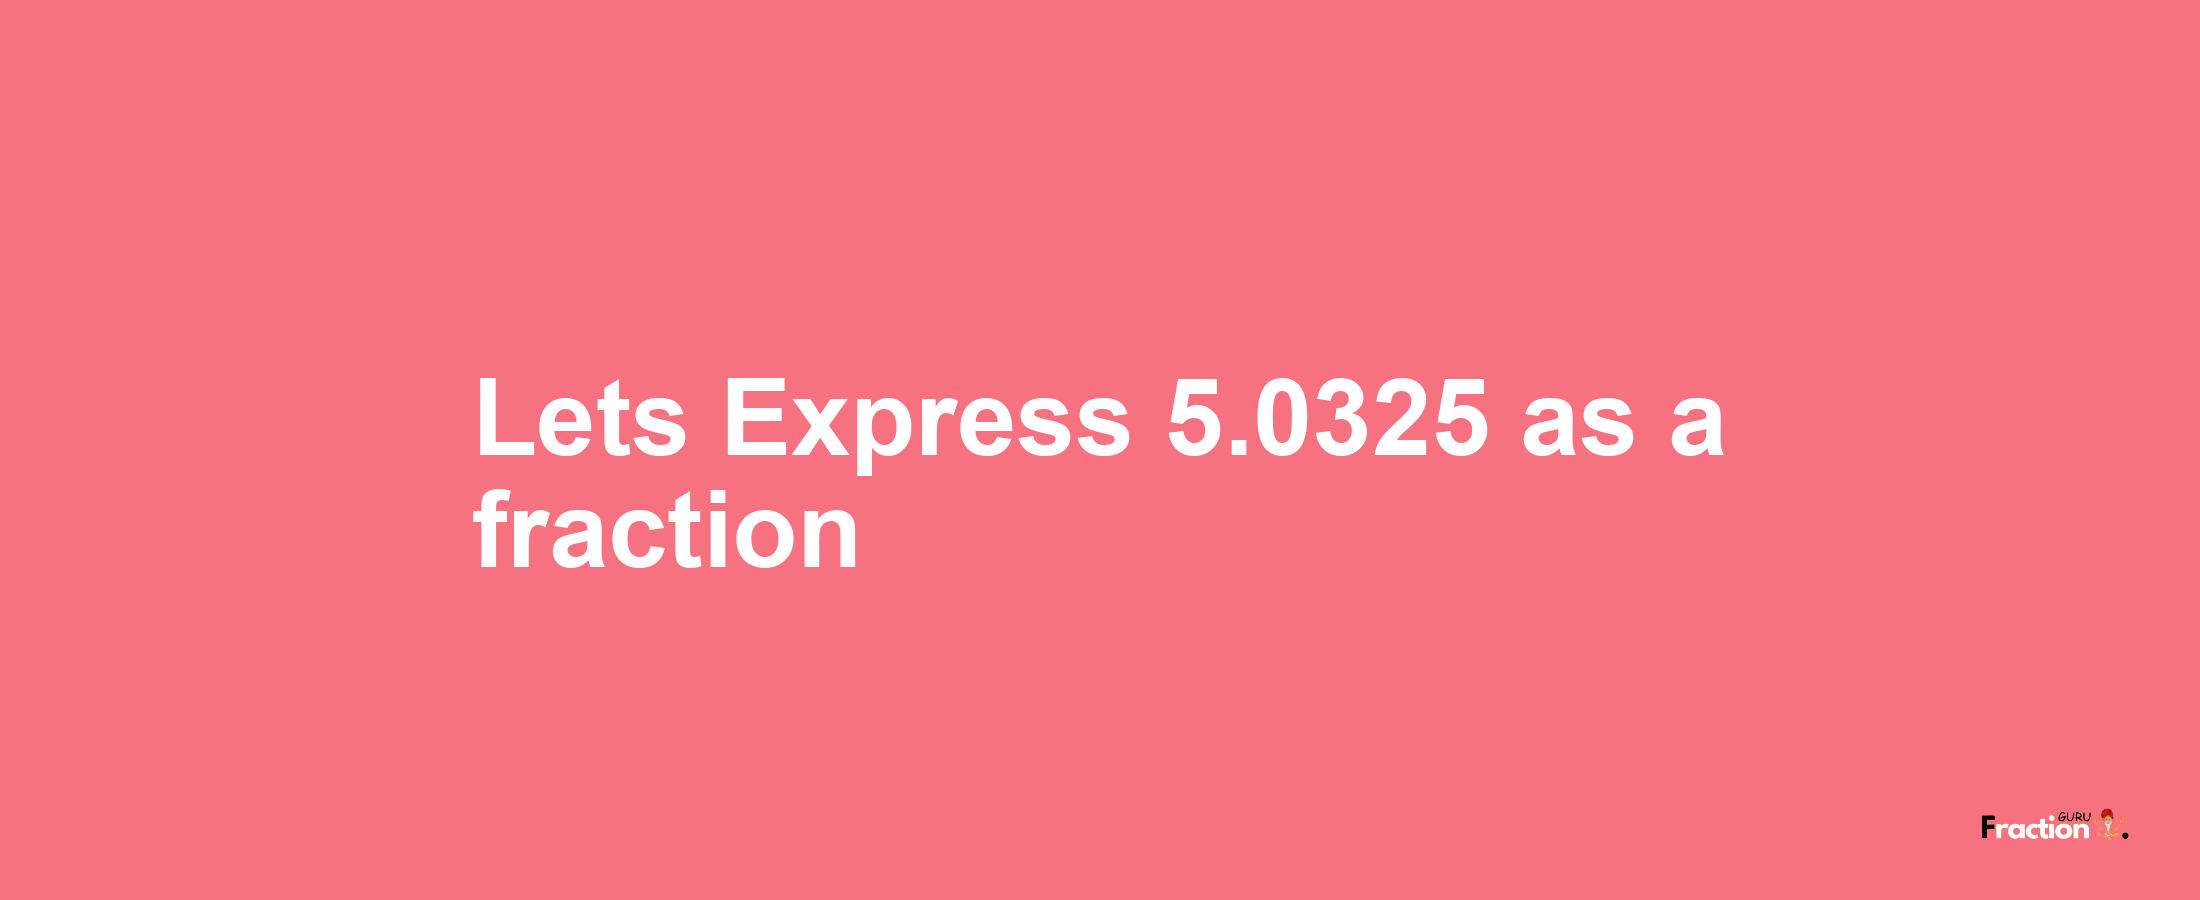 Lets Express 5.0325 as afraction